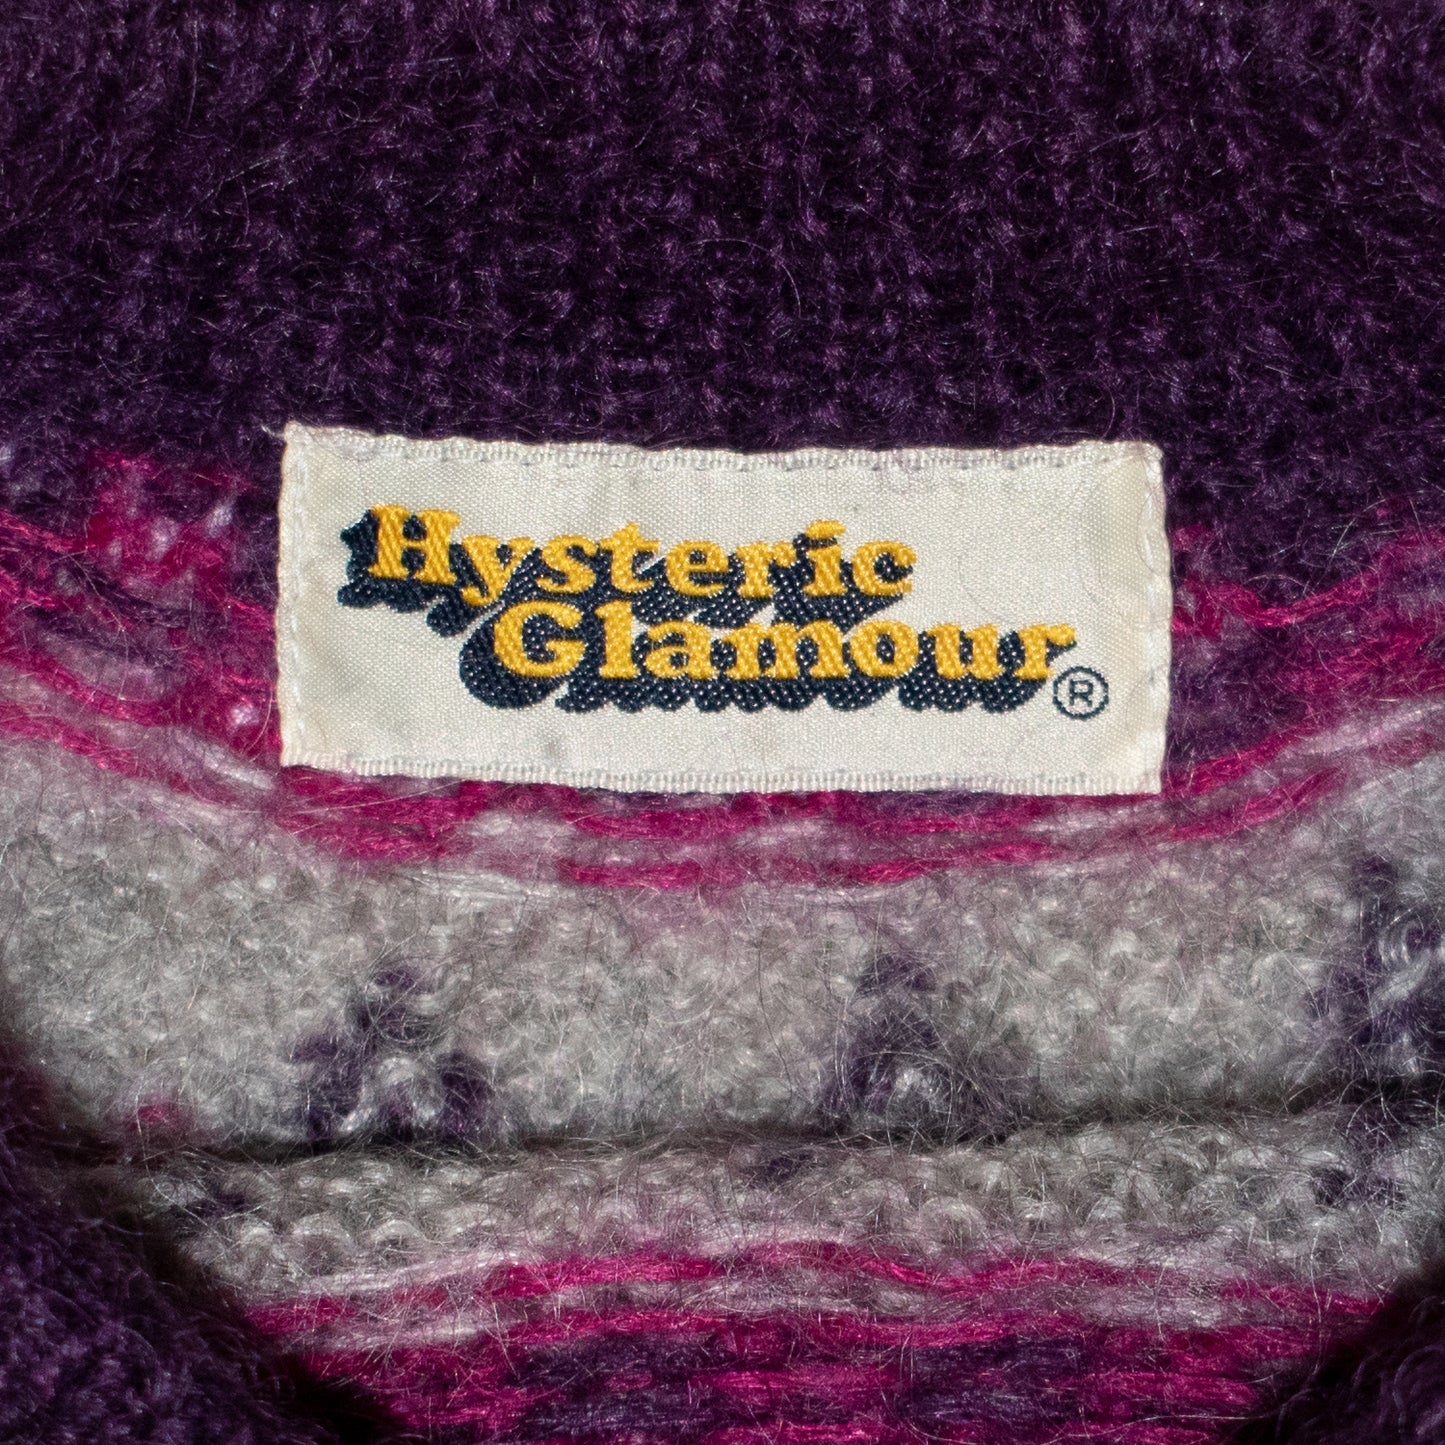 Hysteric Glamour Electric Guitar Mohair Knit Sweater